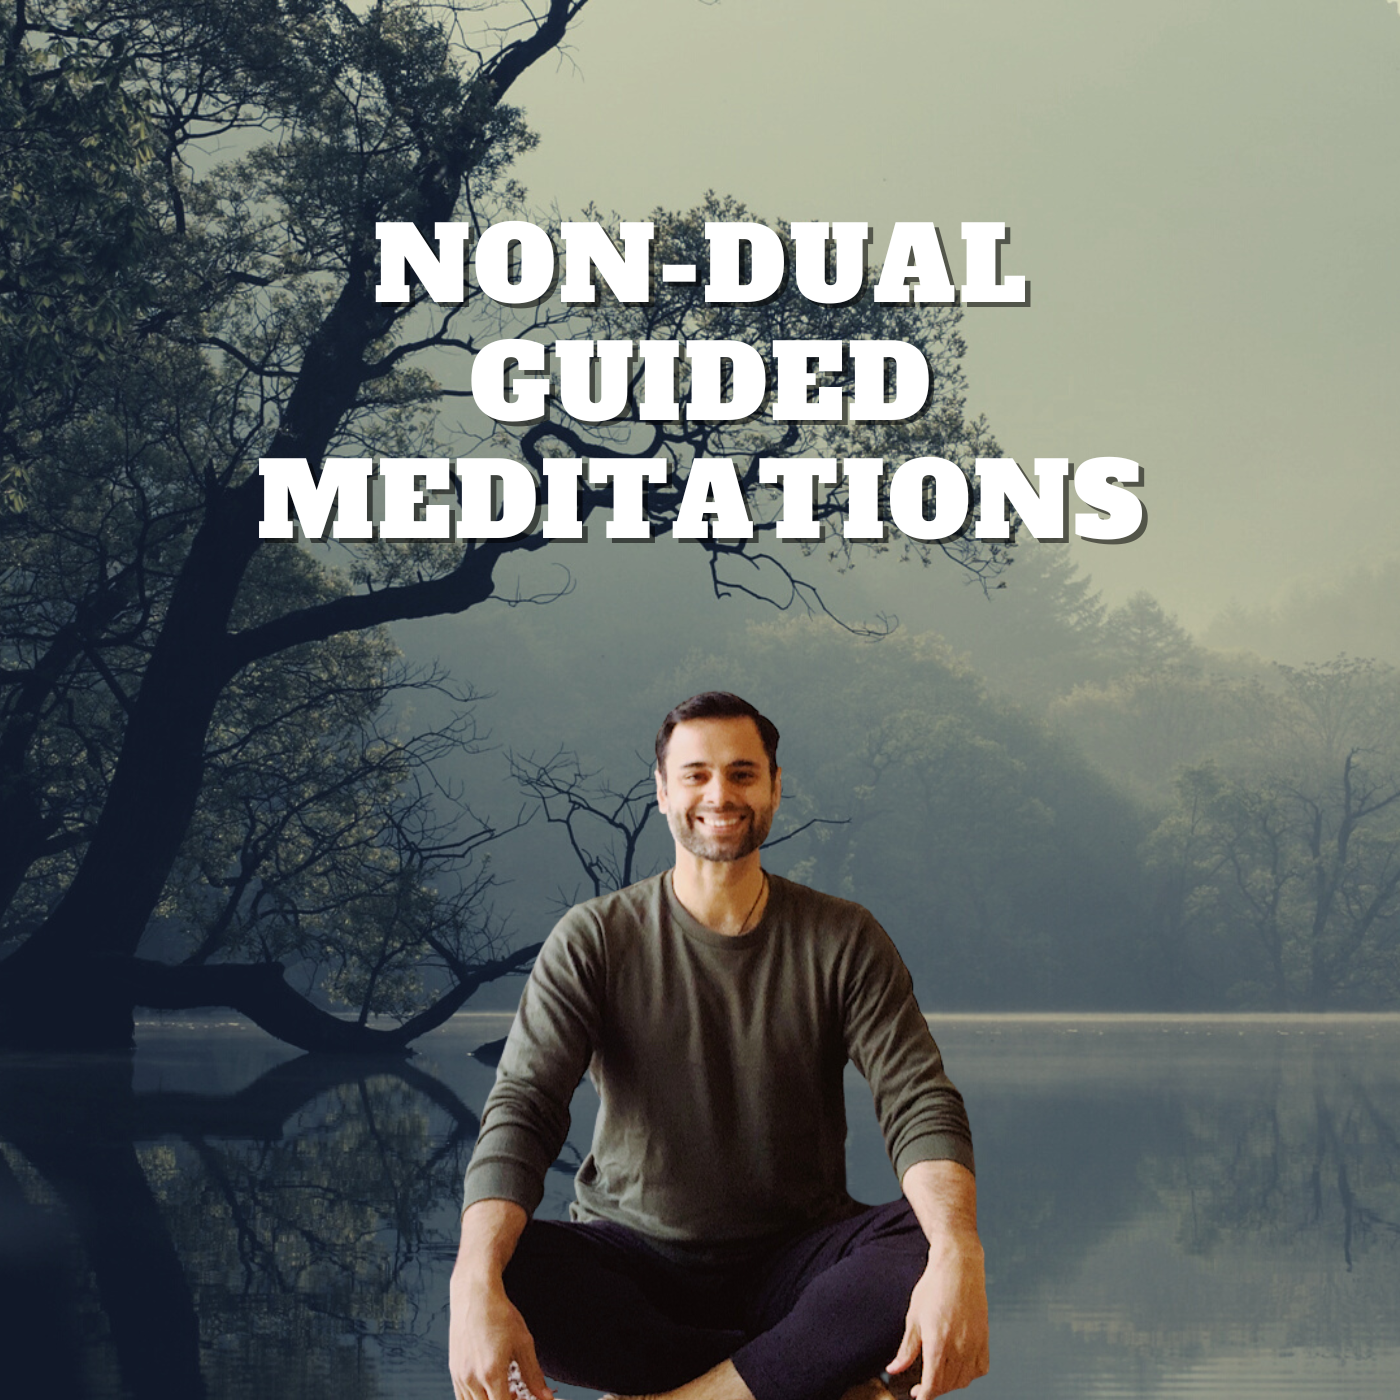 NON-DUALITY GUIDED MEDITATIONS VIDEO